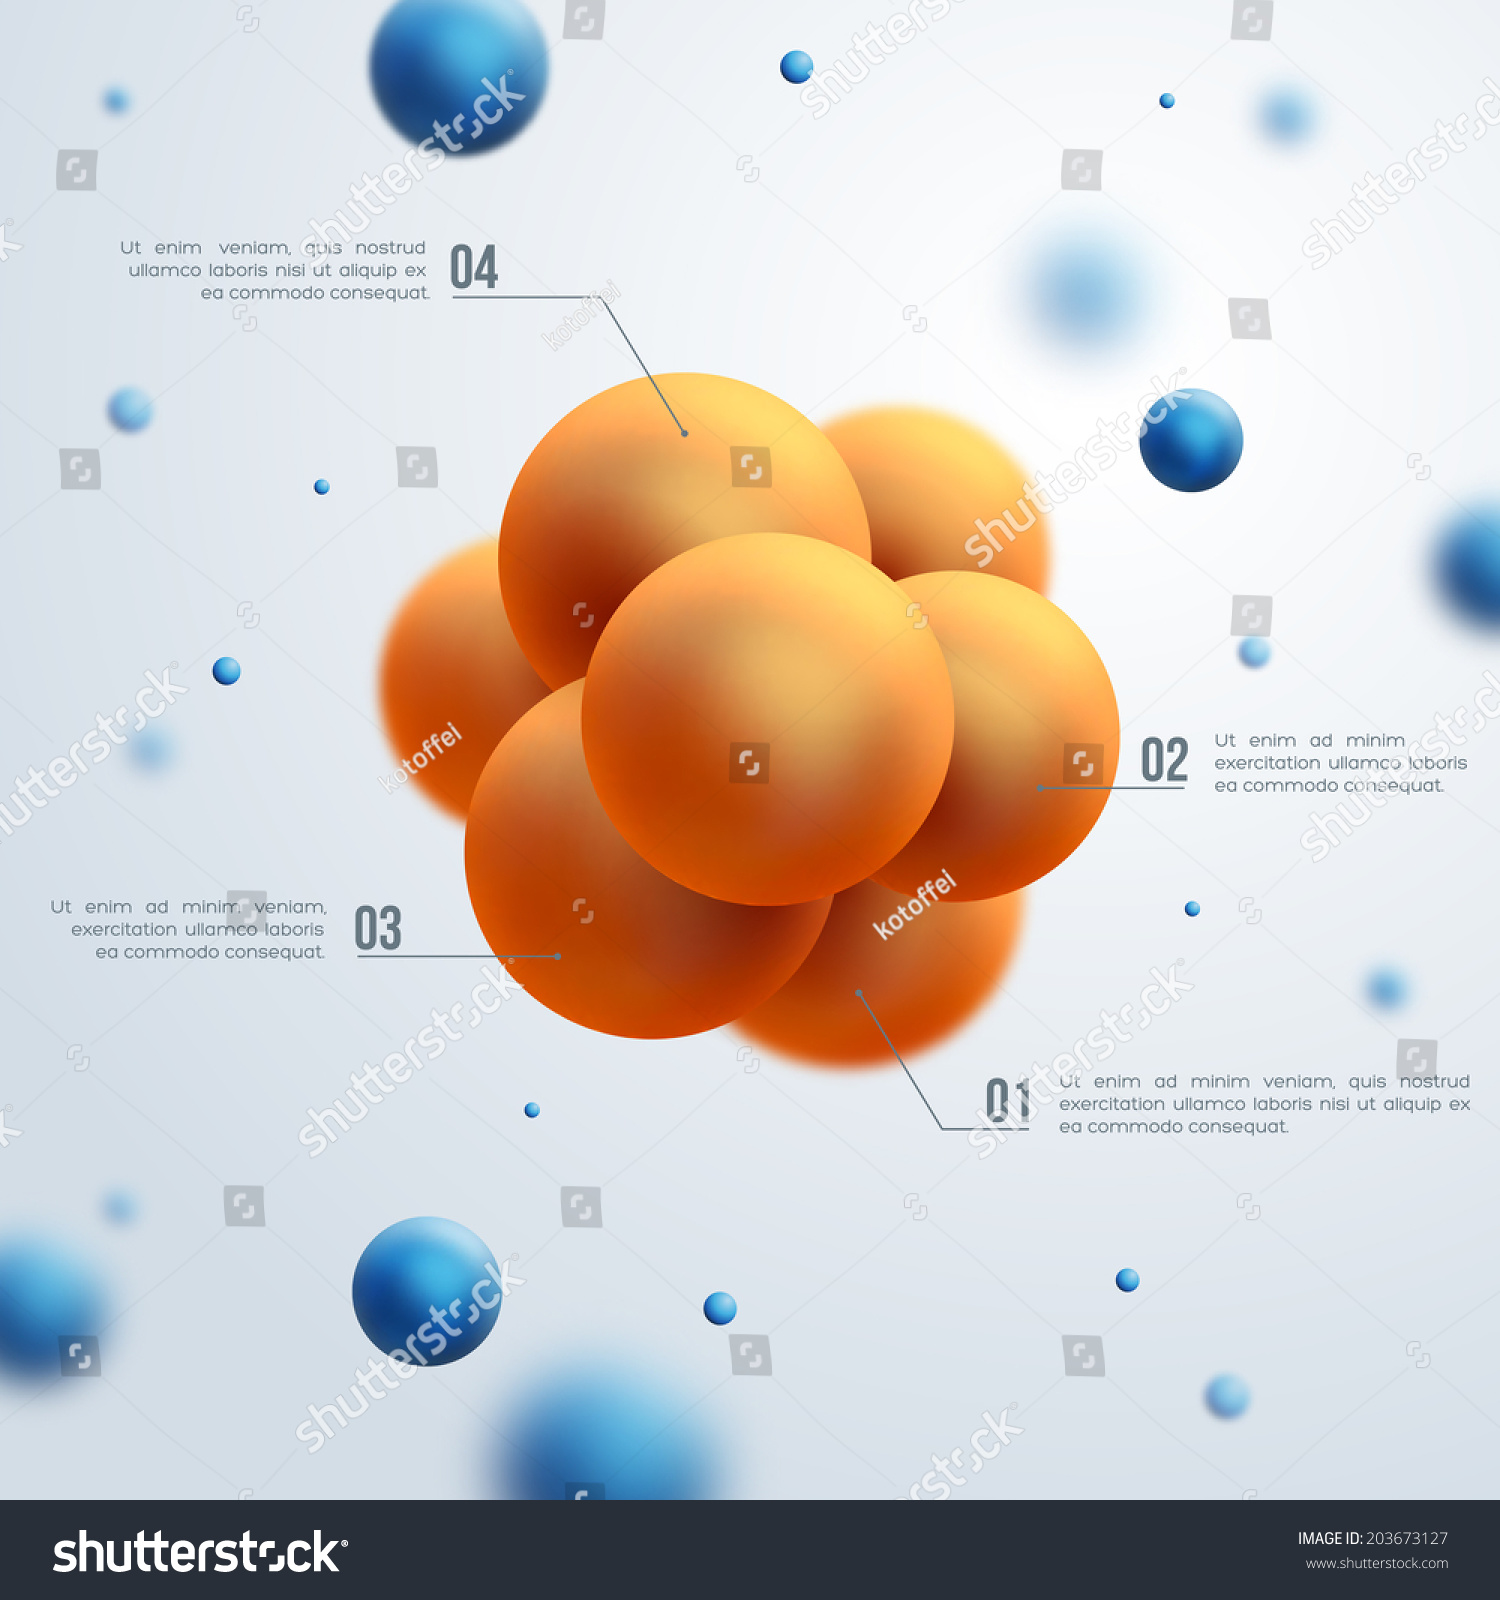 stock-vector-abstract-molecules-design-vector-illustration-atoms-group-of-atoms-forming-molecule-chemical-203673127.jpg